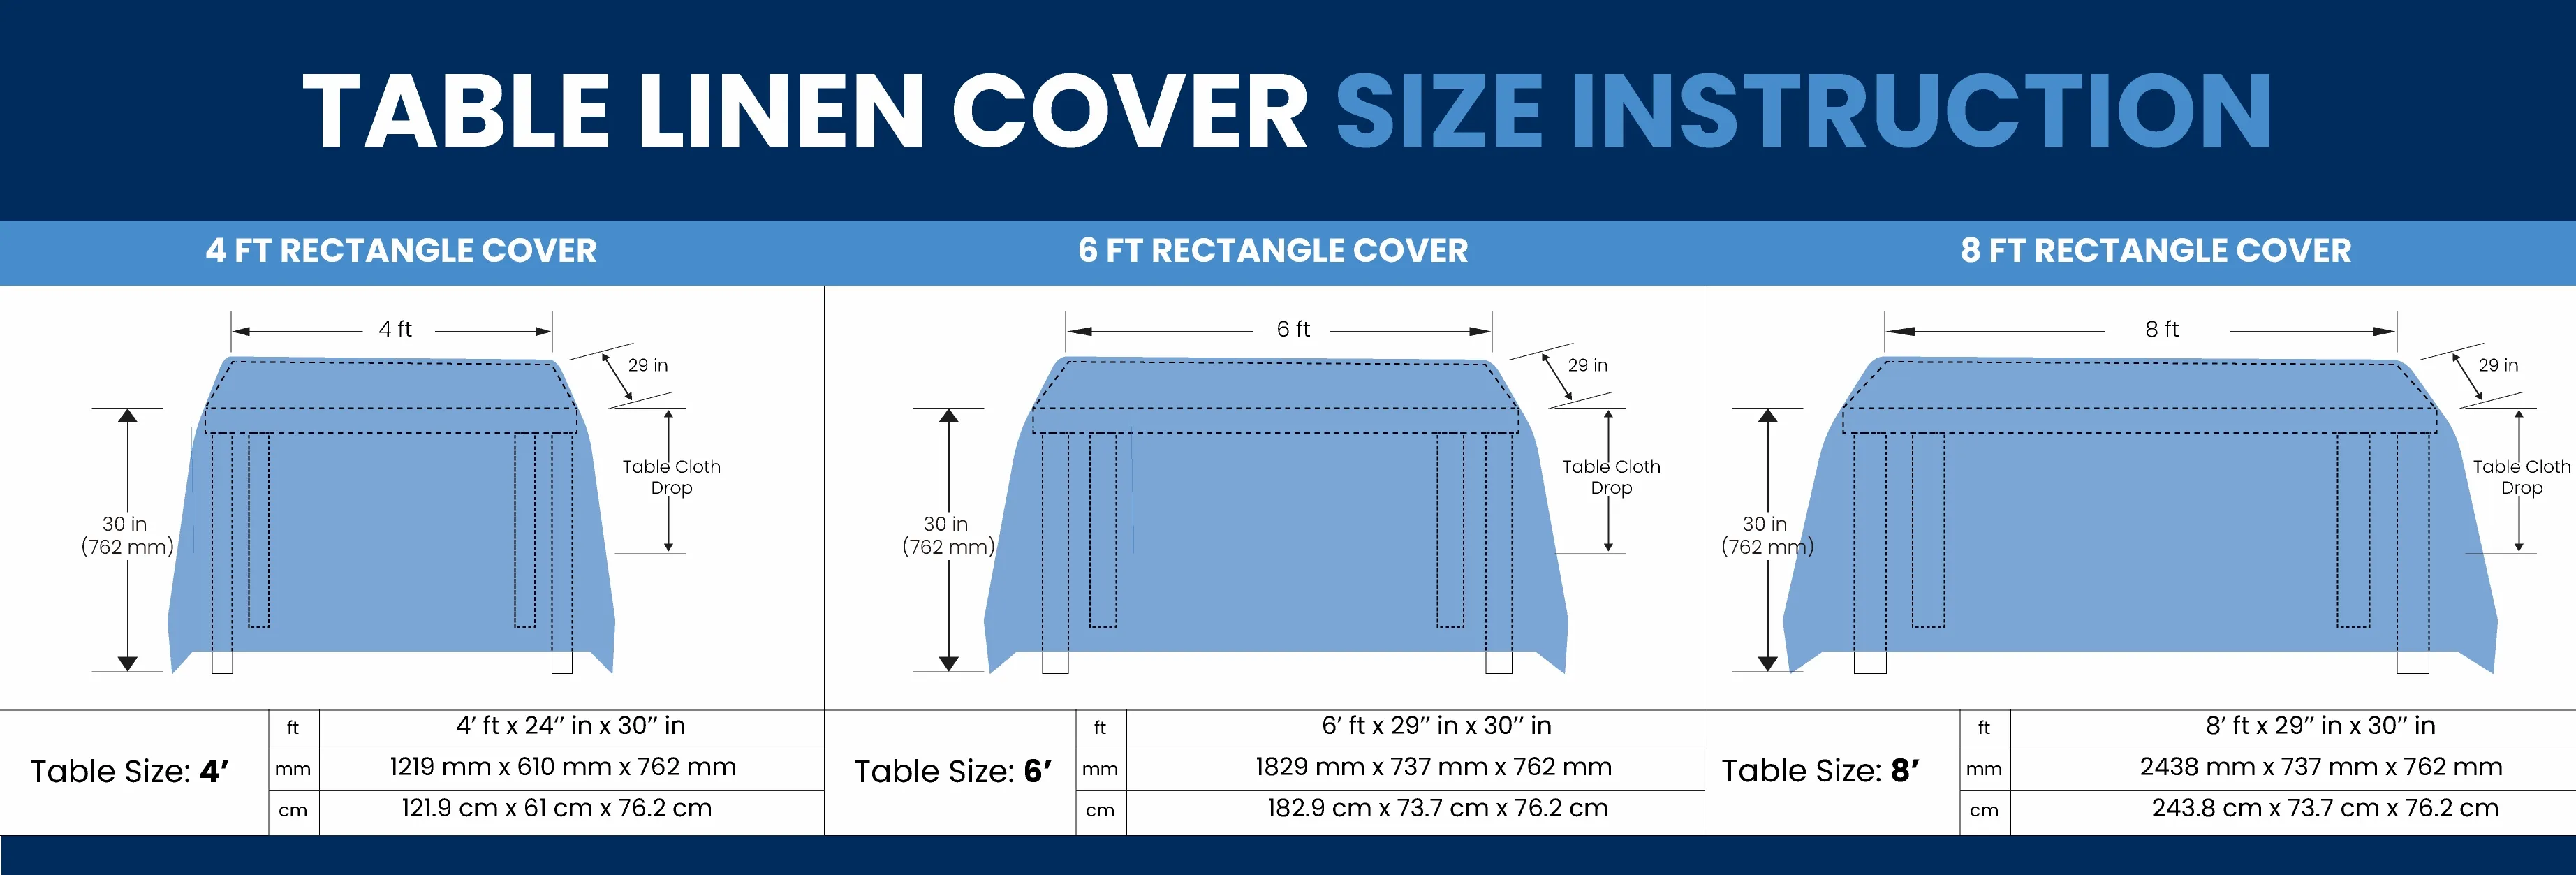 Standard Table Linen Sizes That Fit Your Table